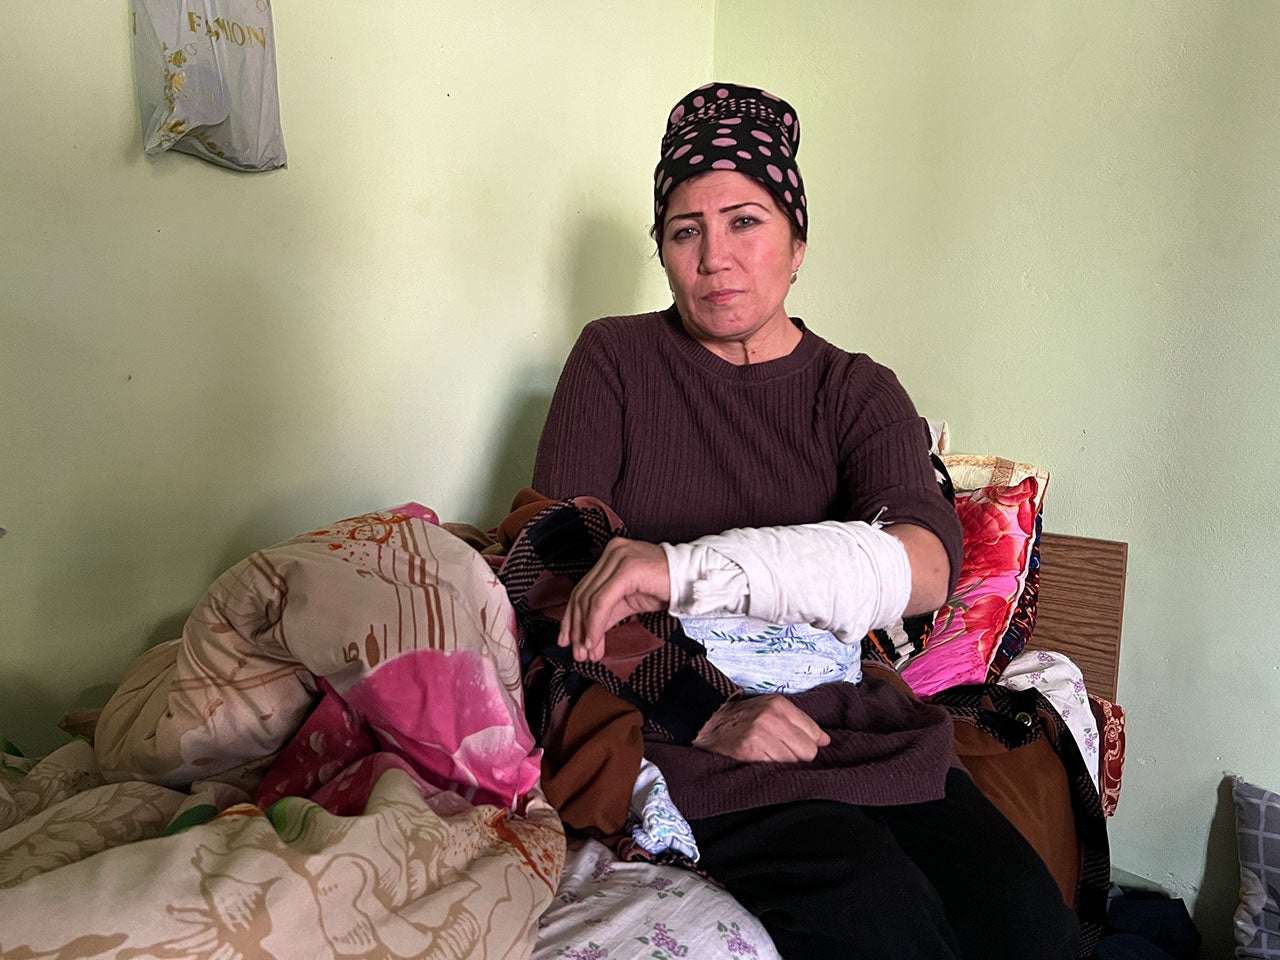 Munavva Kosimova, 54, from Tajikistan, was severely injured when her house was hit by artillery on September 16, 2022. Her 83-year-old mother died in the attack.